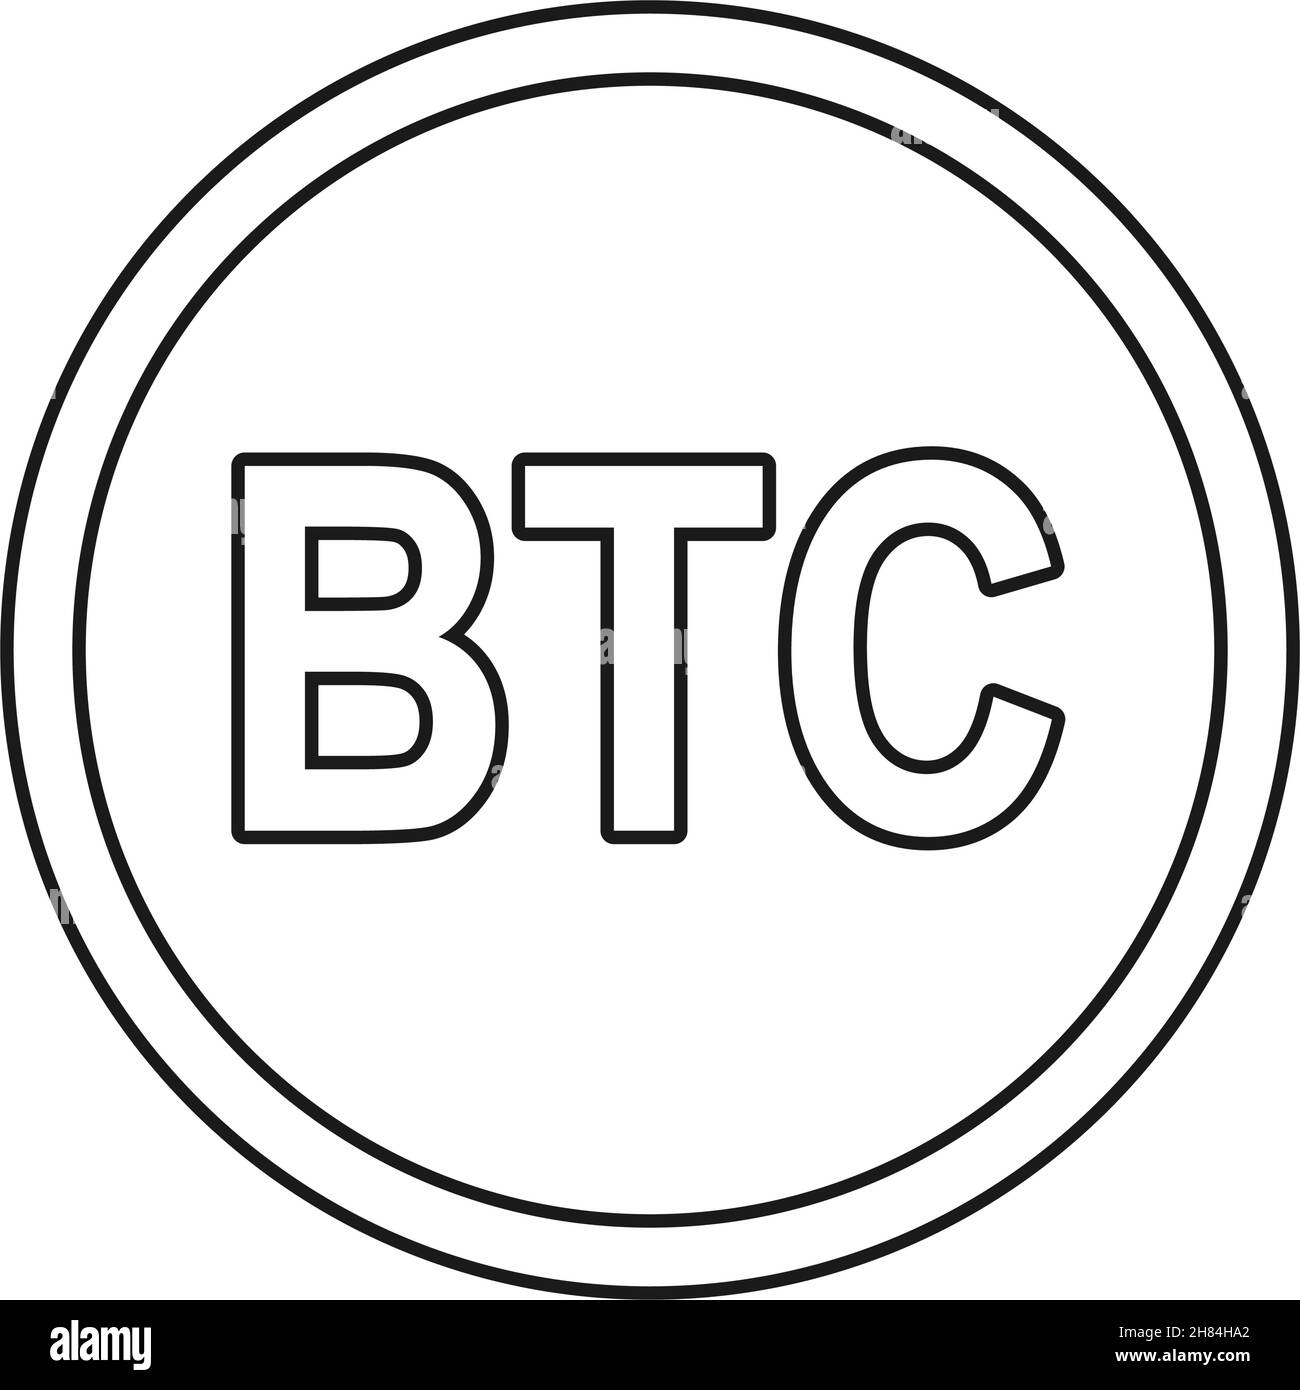 Bitcoin digital currency in outline vector icon Stock Vector